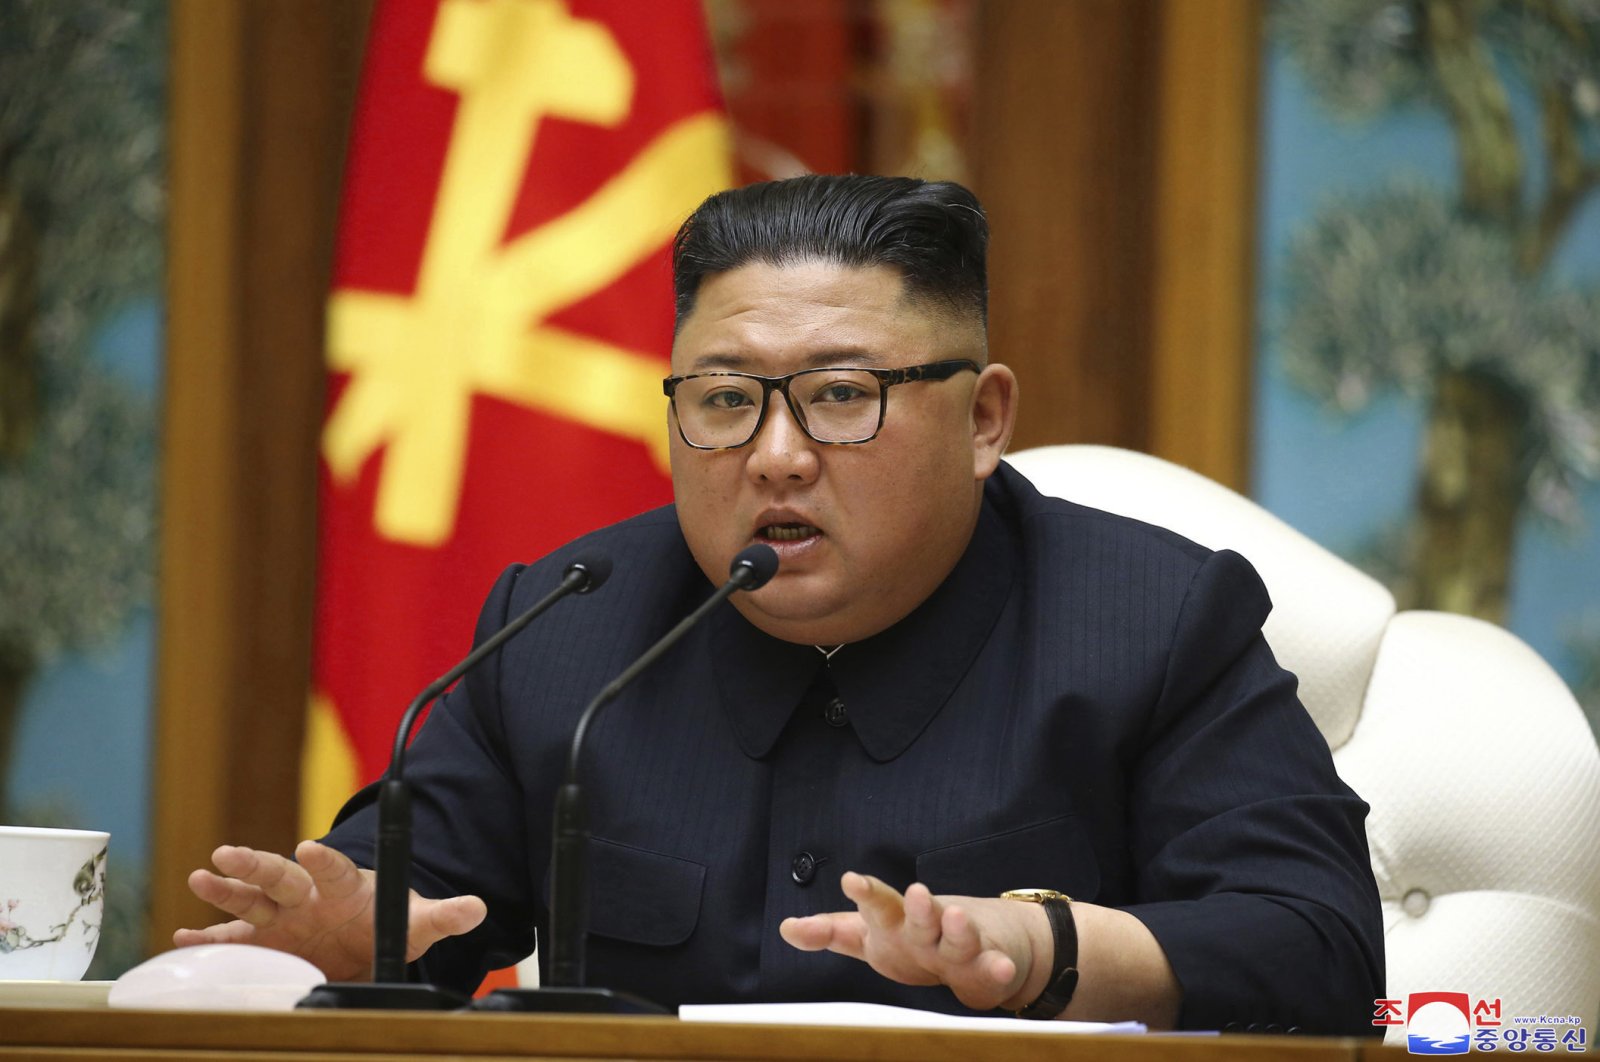 In this Saturday, April 11, 2020, file photo provided by the North Korean government, North Korean leader Kim Jong Un attends a politburo meeting of the ruling Workers' Party of Korea in Pyongyang. (Korean Central News Agency/Korea News Service via AP)